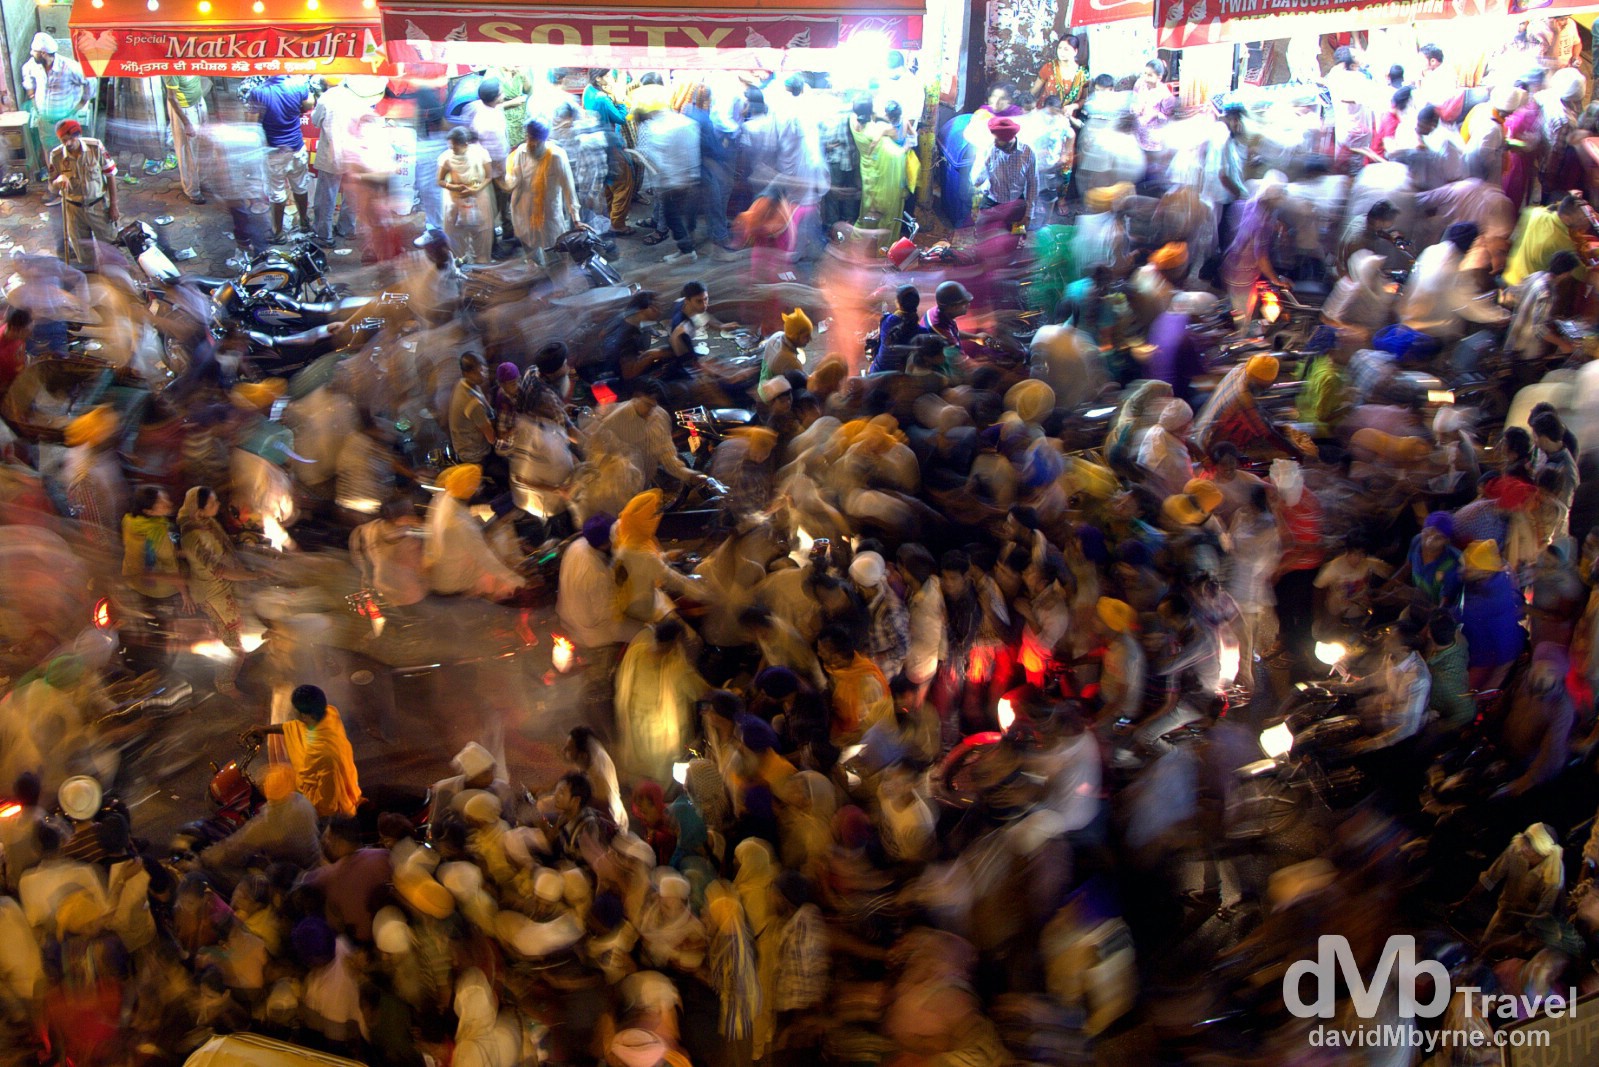 Crowds making their way to & from the Golden Temple along the crammed Old City streets of Amritsar, India. October 9th 2012.